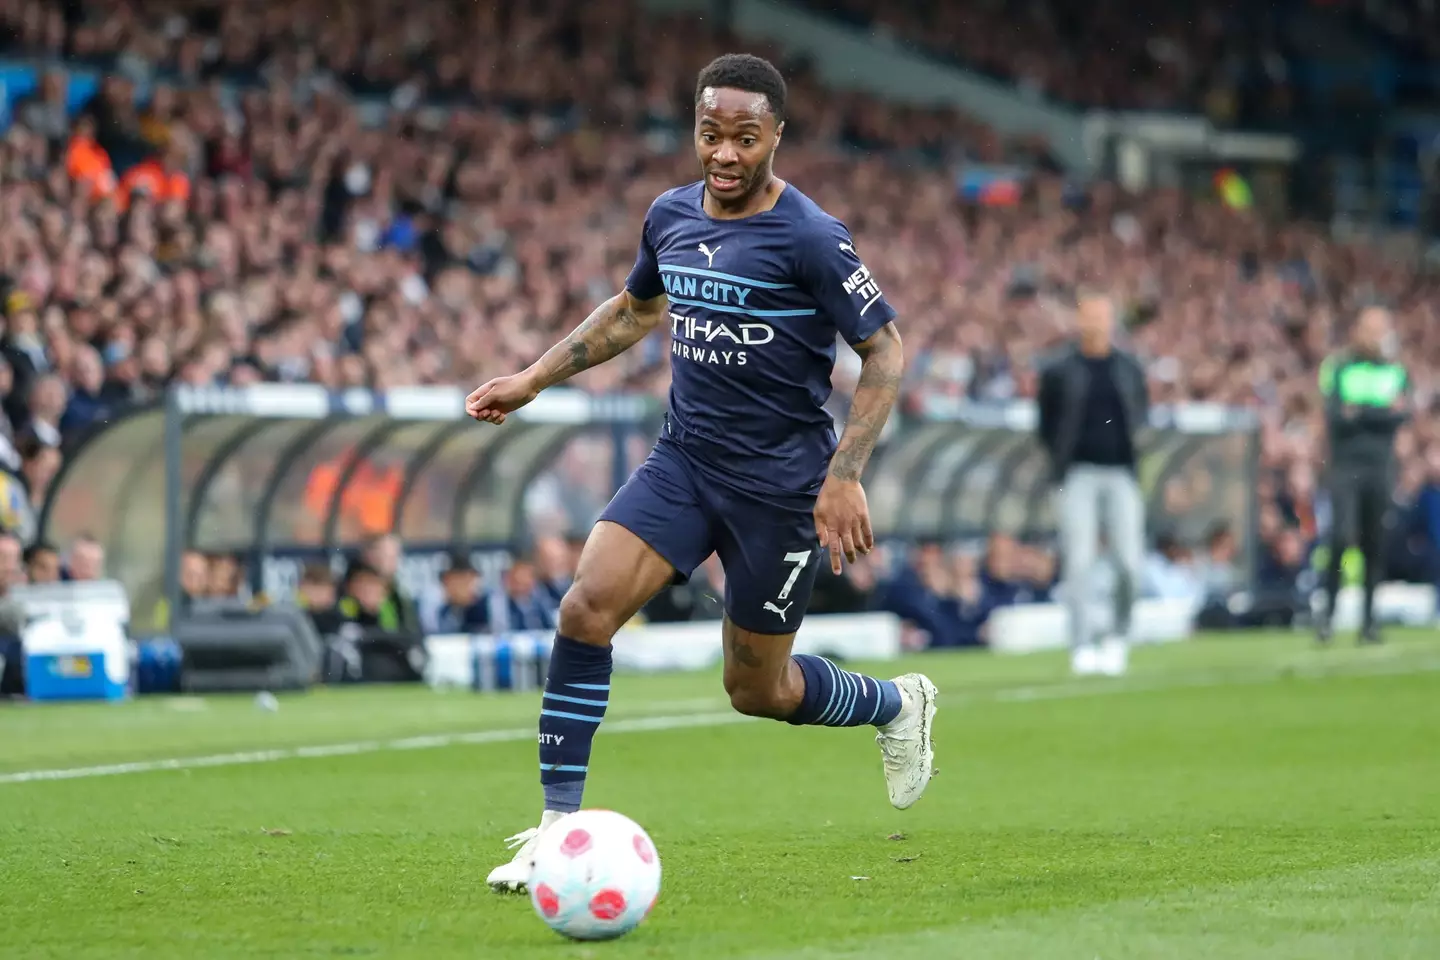 Raheem Sterling #7 of Manchester City on the ball during the game. (Alamy)